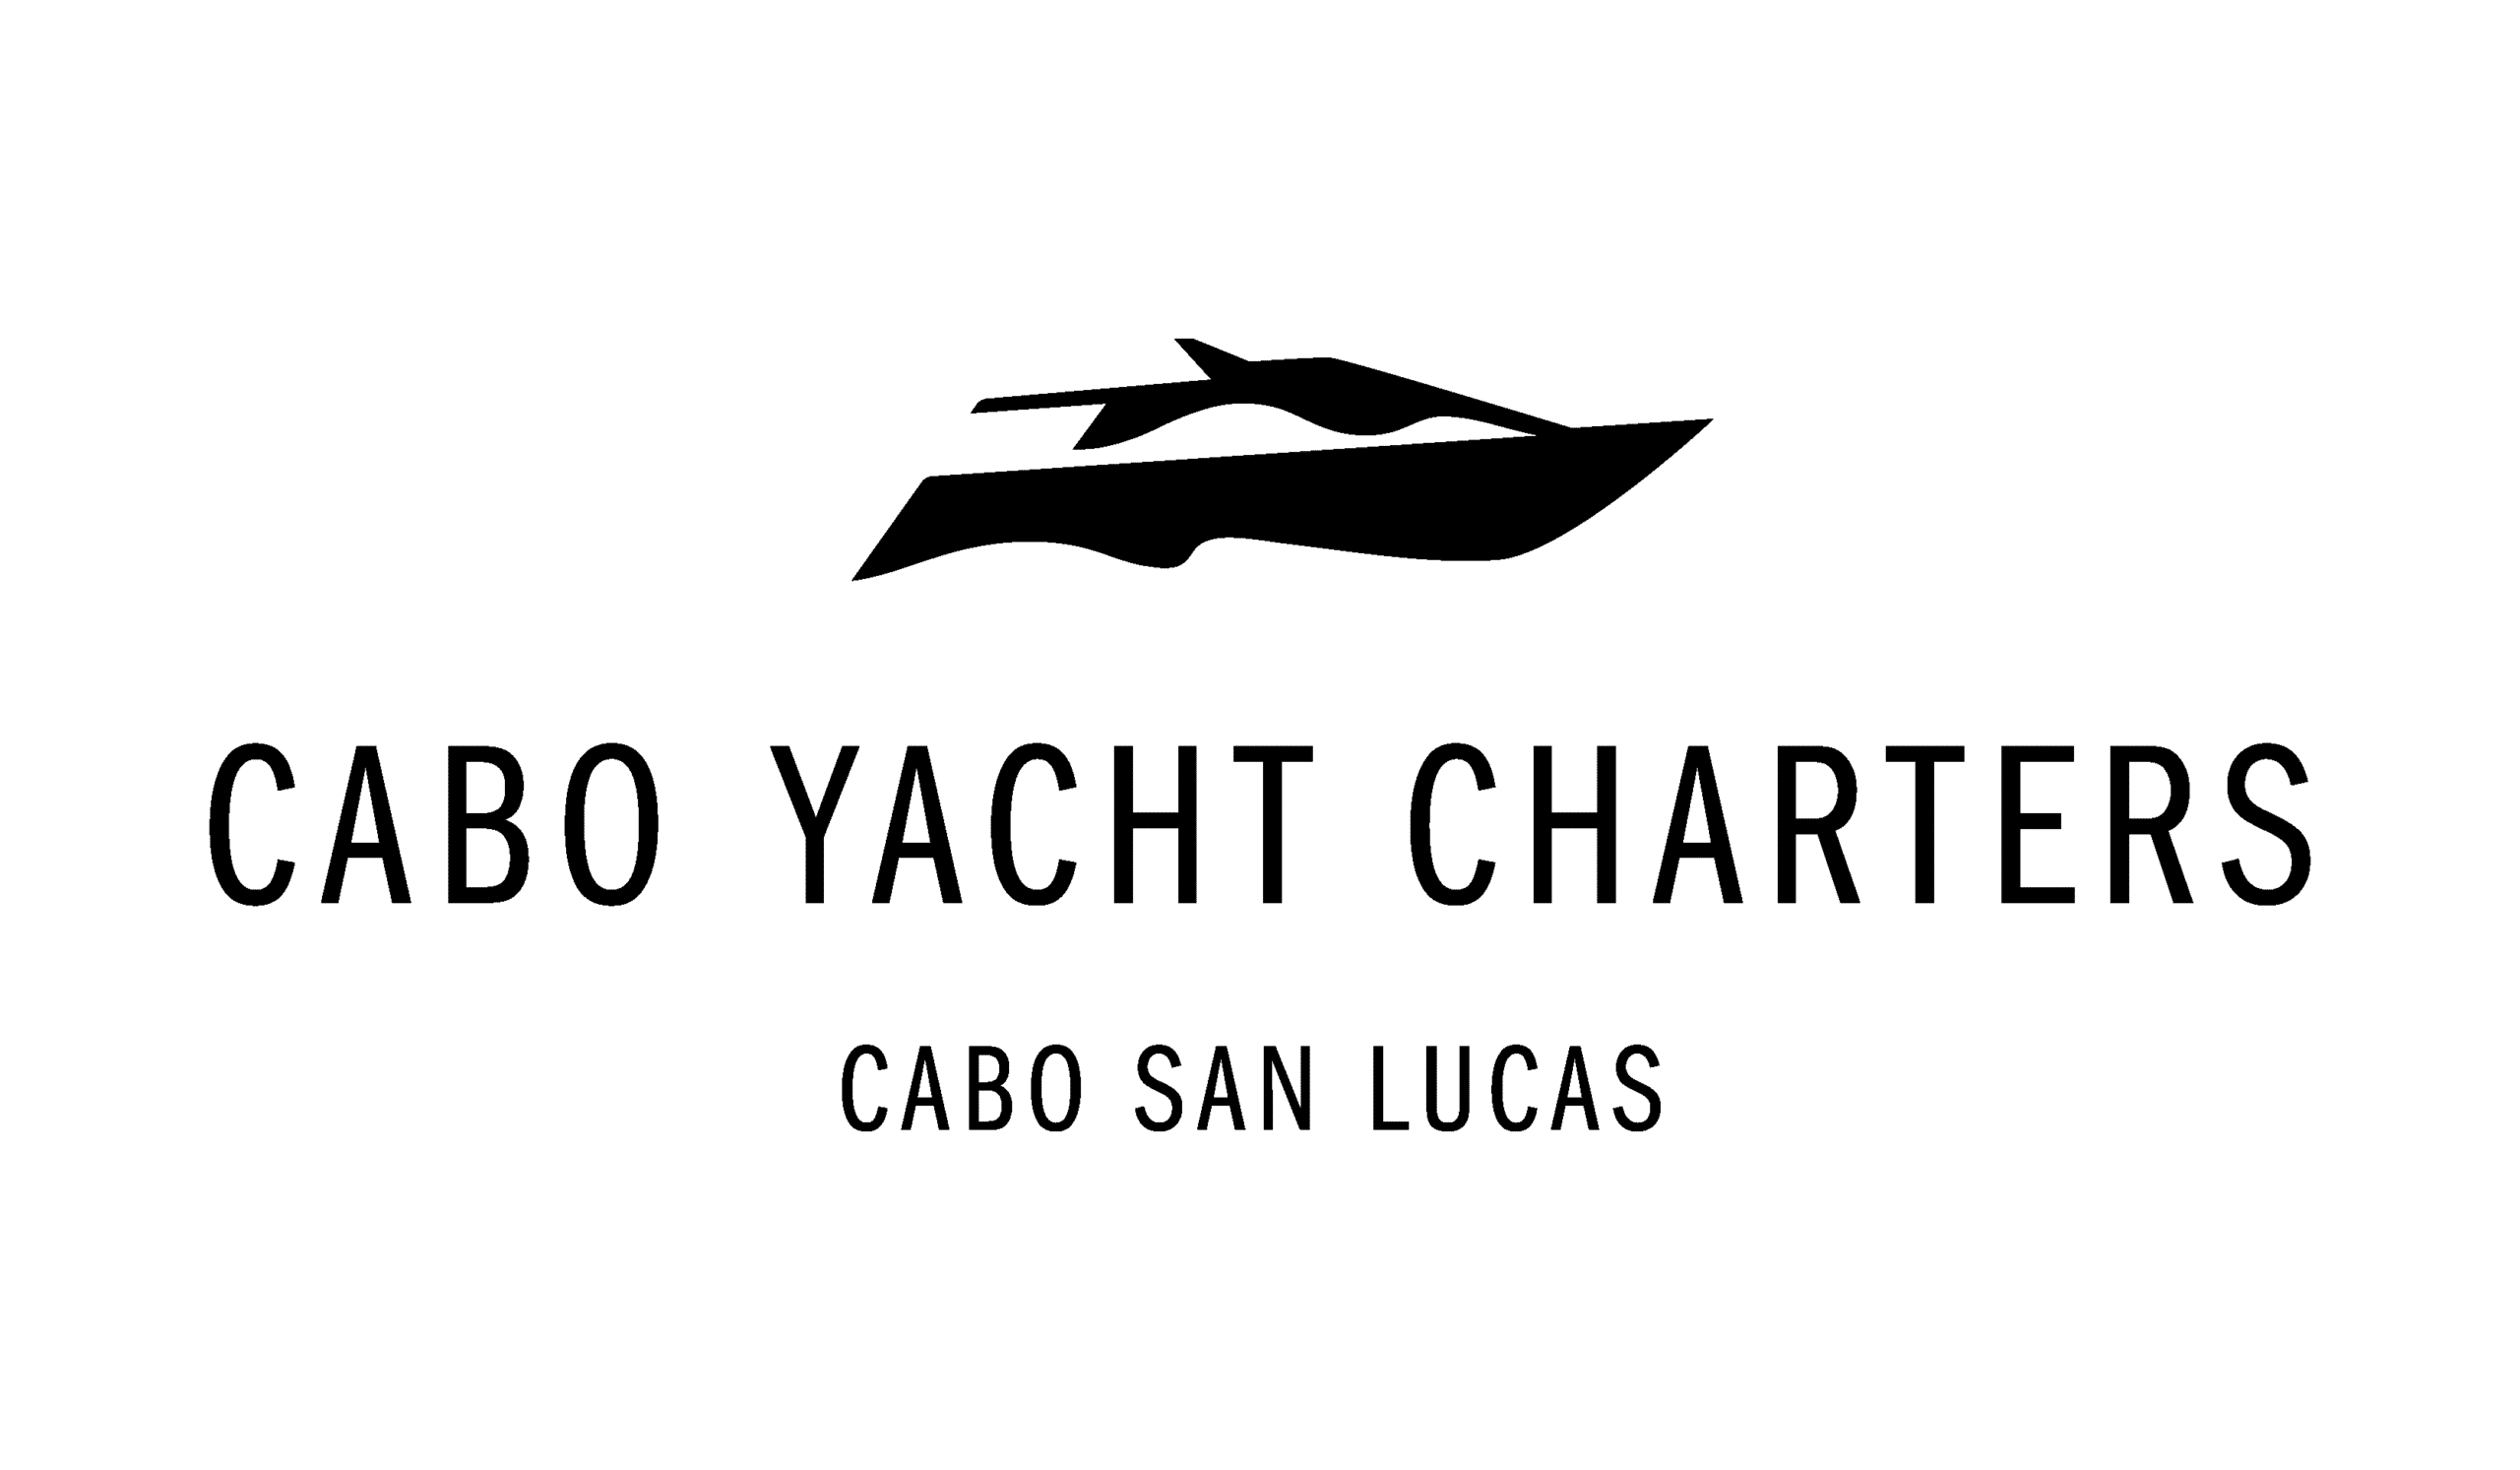 Cabo Yacht Charters logo